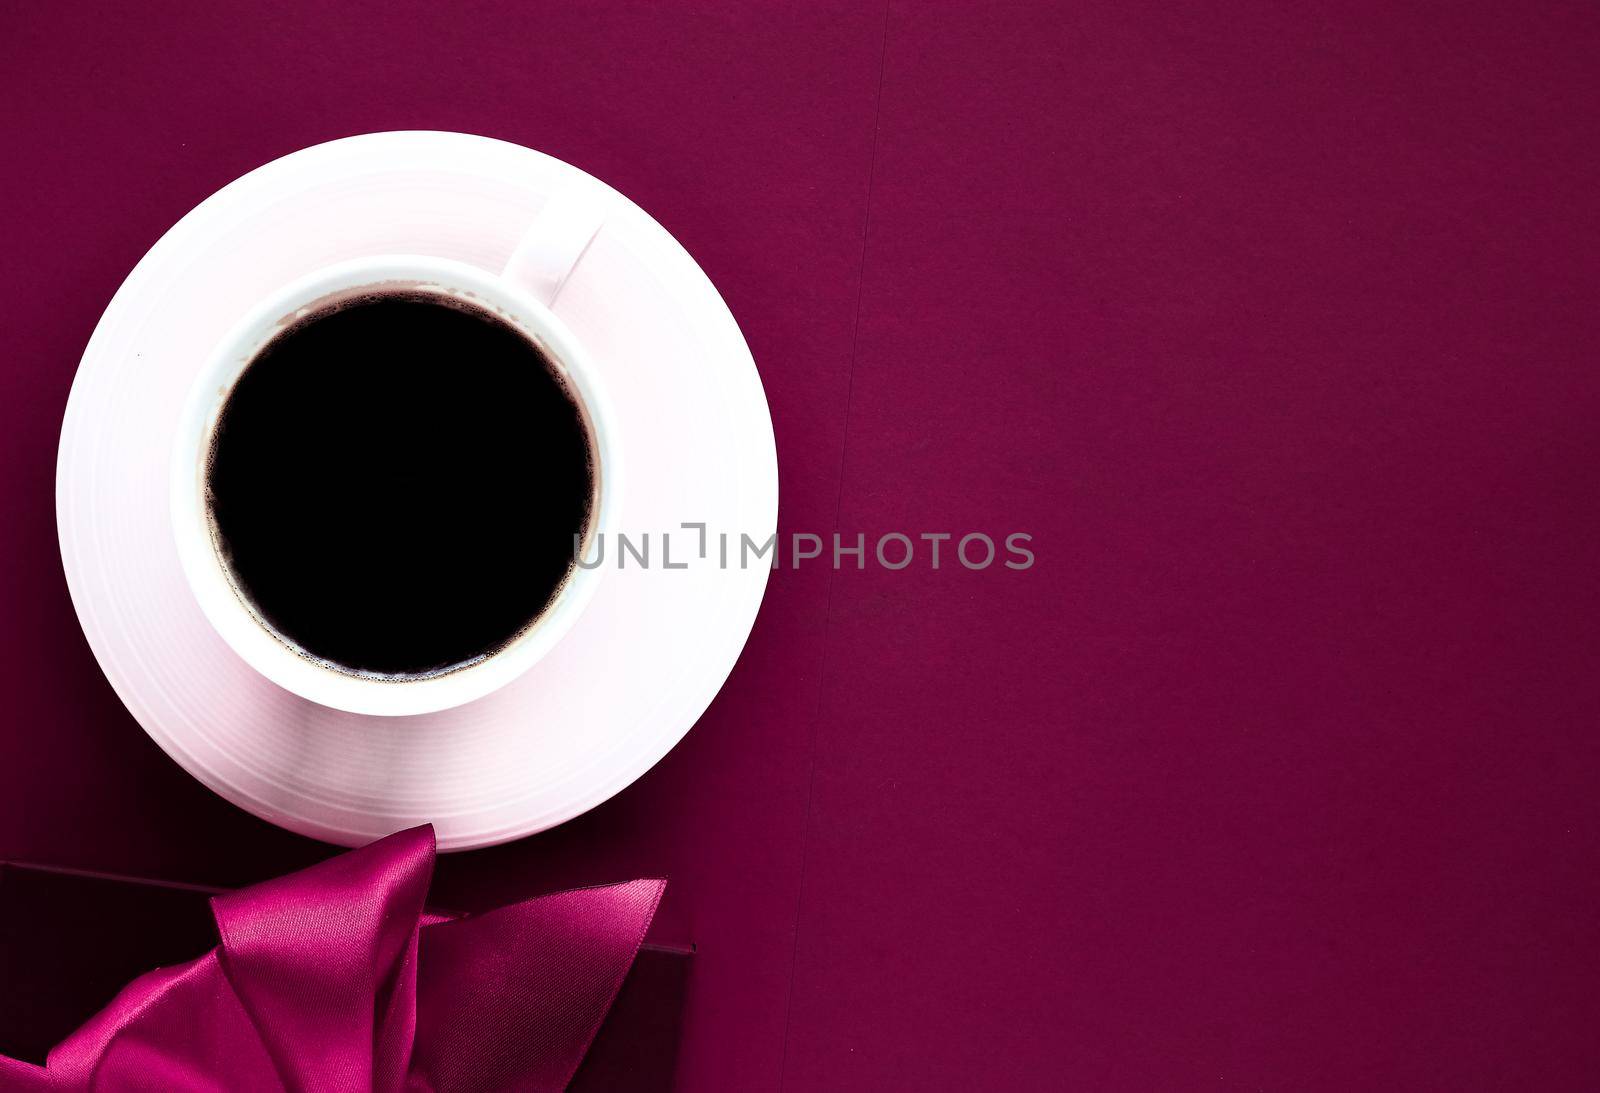 Romantic present, cafe backdrop and drink concept - Coffee cup and luxury gift box flatlay background